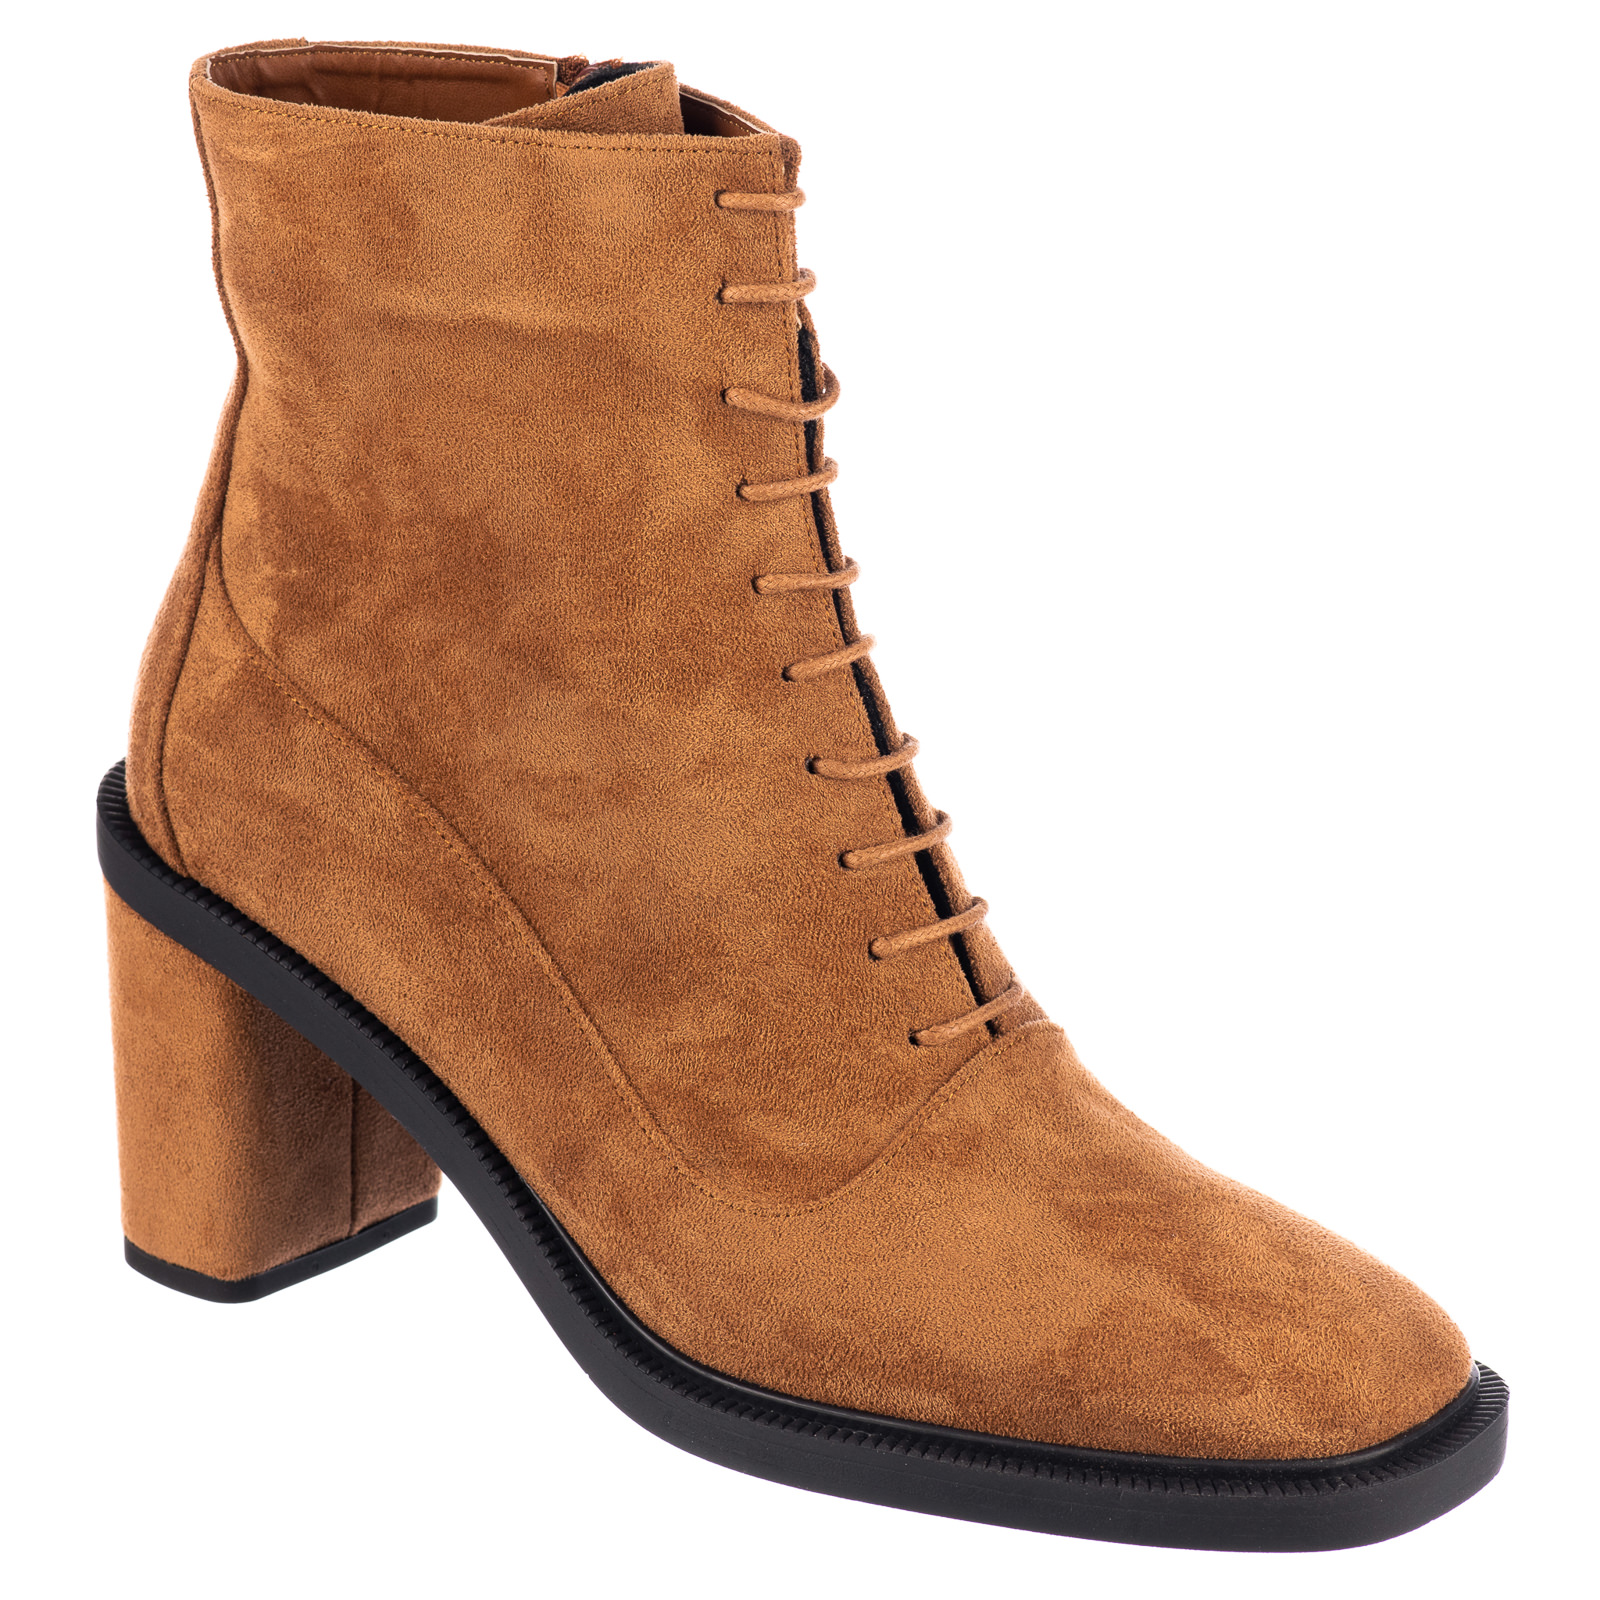 Women ankle boots B671 - CAMEL